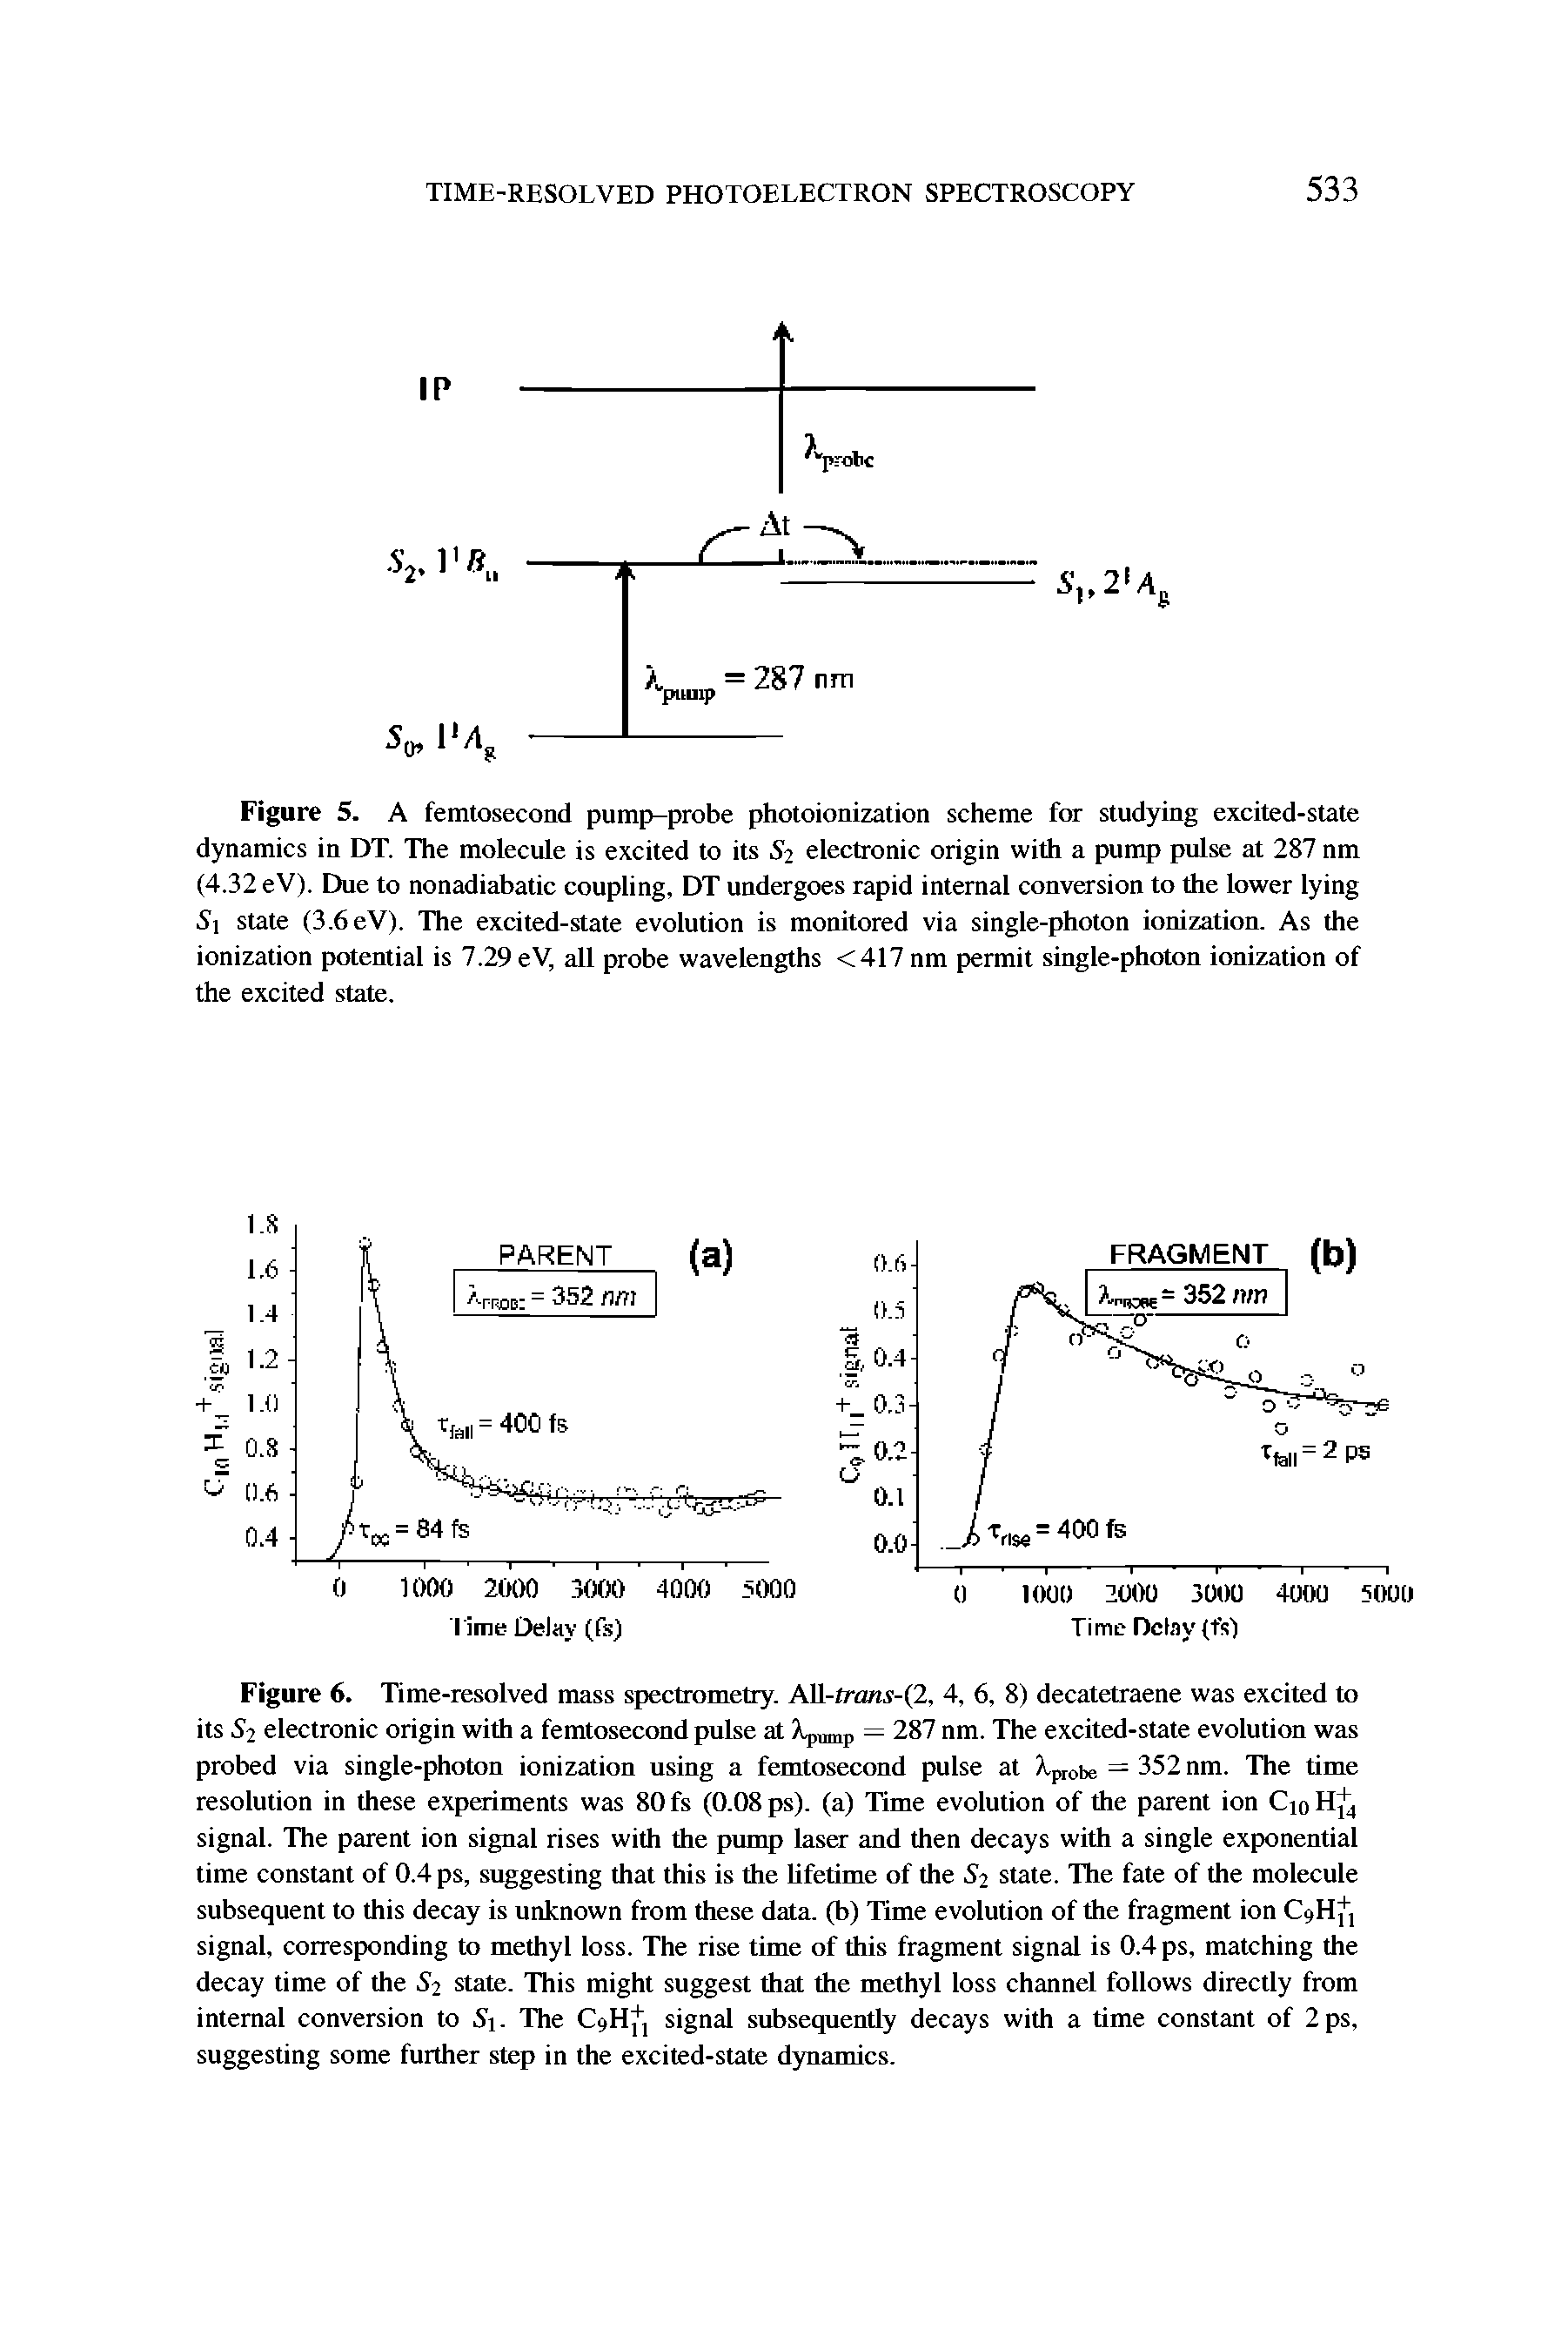 Figure 5. A femtosecond pump-probe photoionization scheme for studying excited-state dynamics in DT. The molecule is excited to its S> electronic origin with a pump pulse at 287 nm (4.32 eV). Due to nonadiabatic coupling, DT undergoes rapid internal conversion to the lower lying Si state (3.6eV). The excited-state evolution is monitored via single-photon ionization. As the ionization potential is 7.29 eV, all probe wavelengths <417 nm permit single-photon ionization of the excited state.